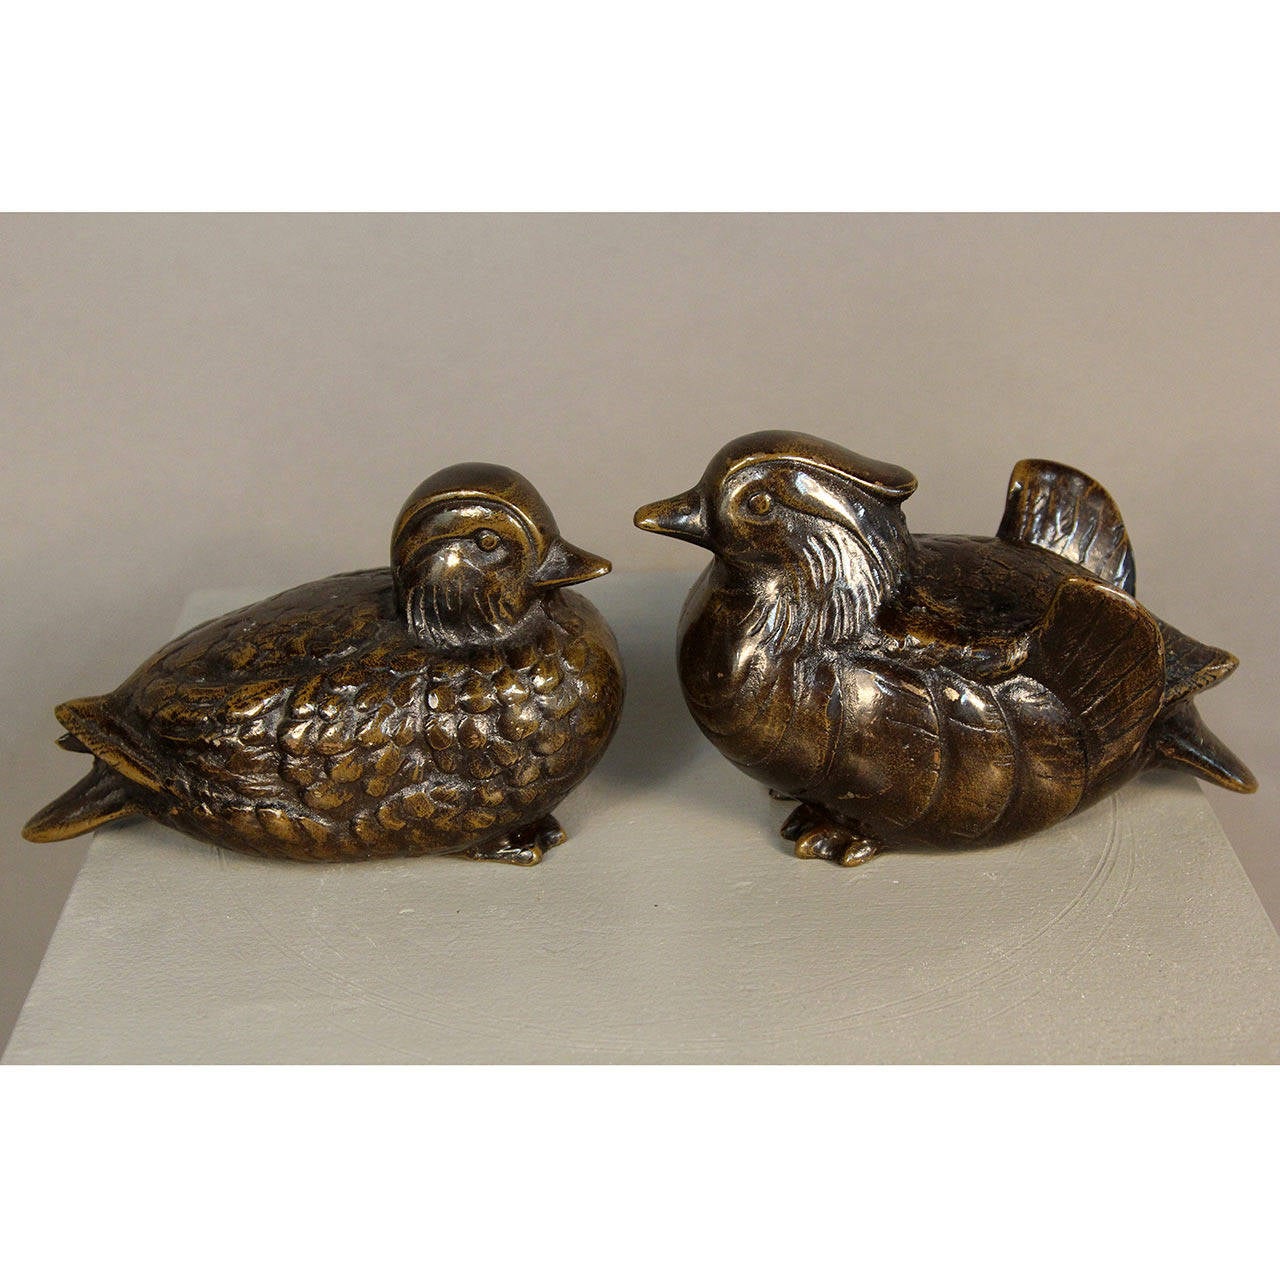 A pair of heavy bronzed spelter mandarin duck bookends. Also lovely as decorative sculptures.